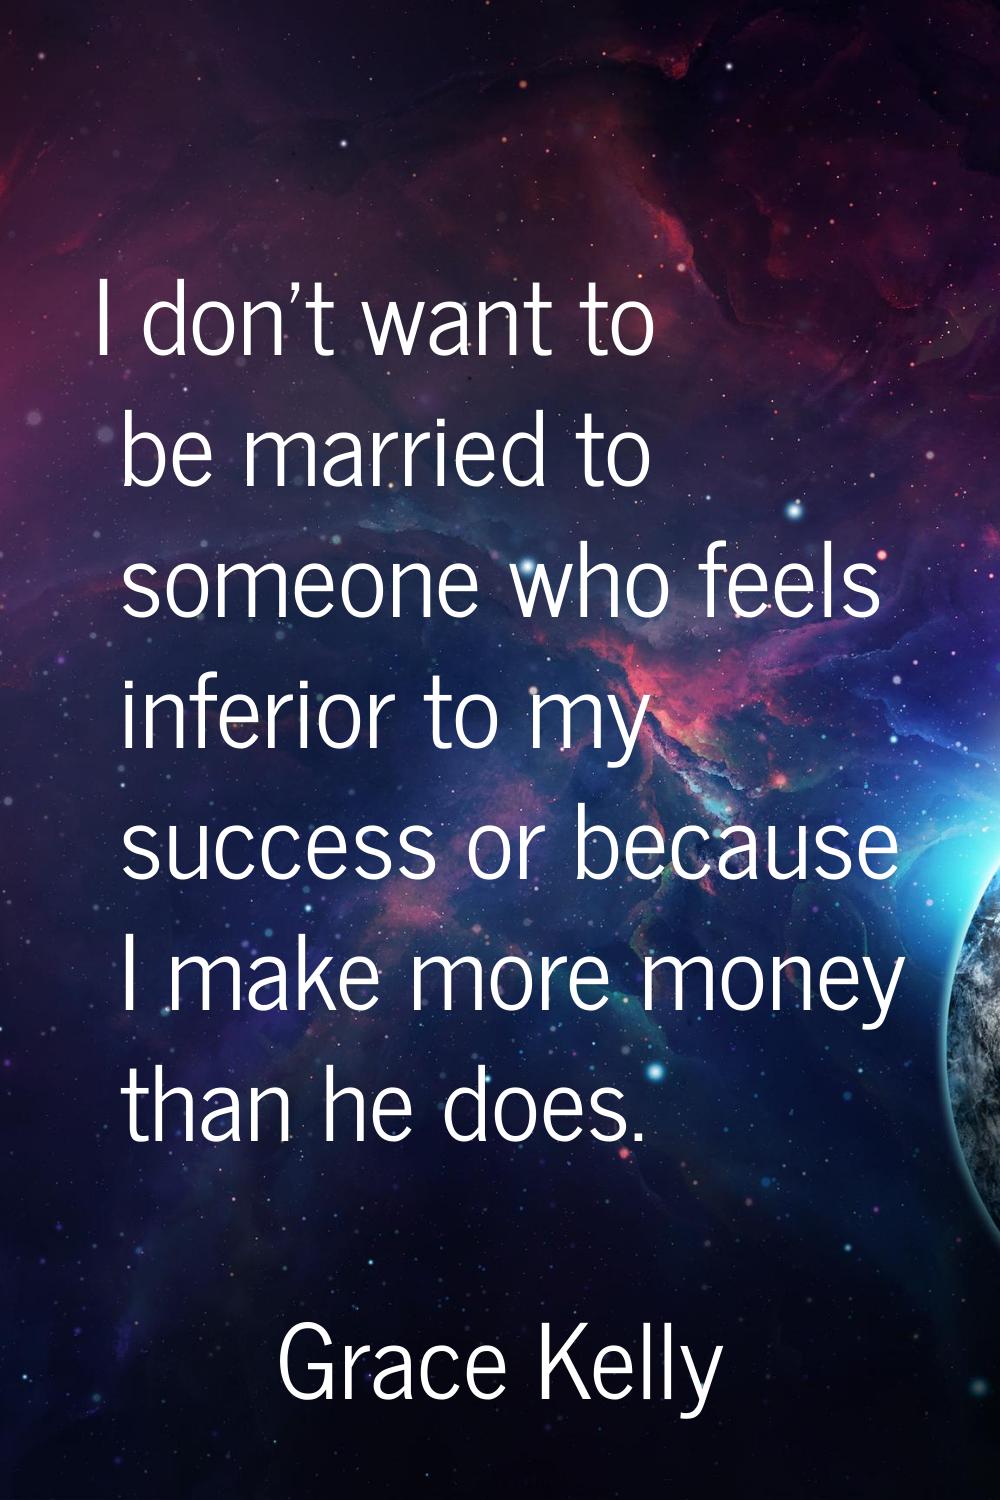 I don't want to be married to someone who feels inferior to my success or because I make more money